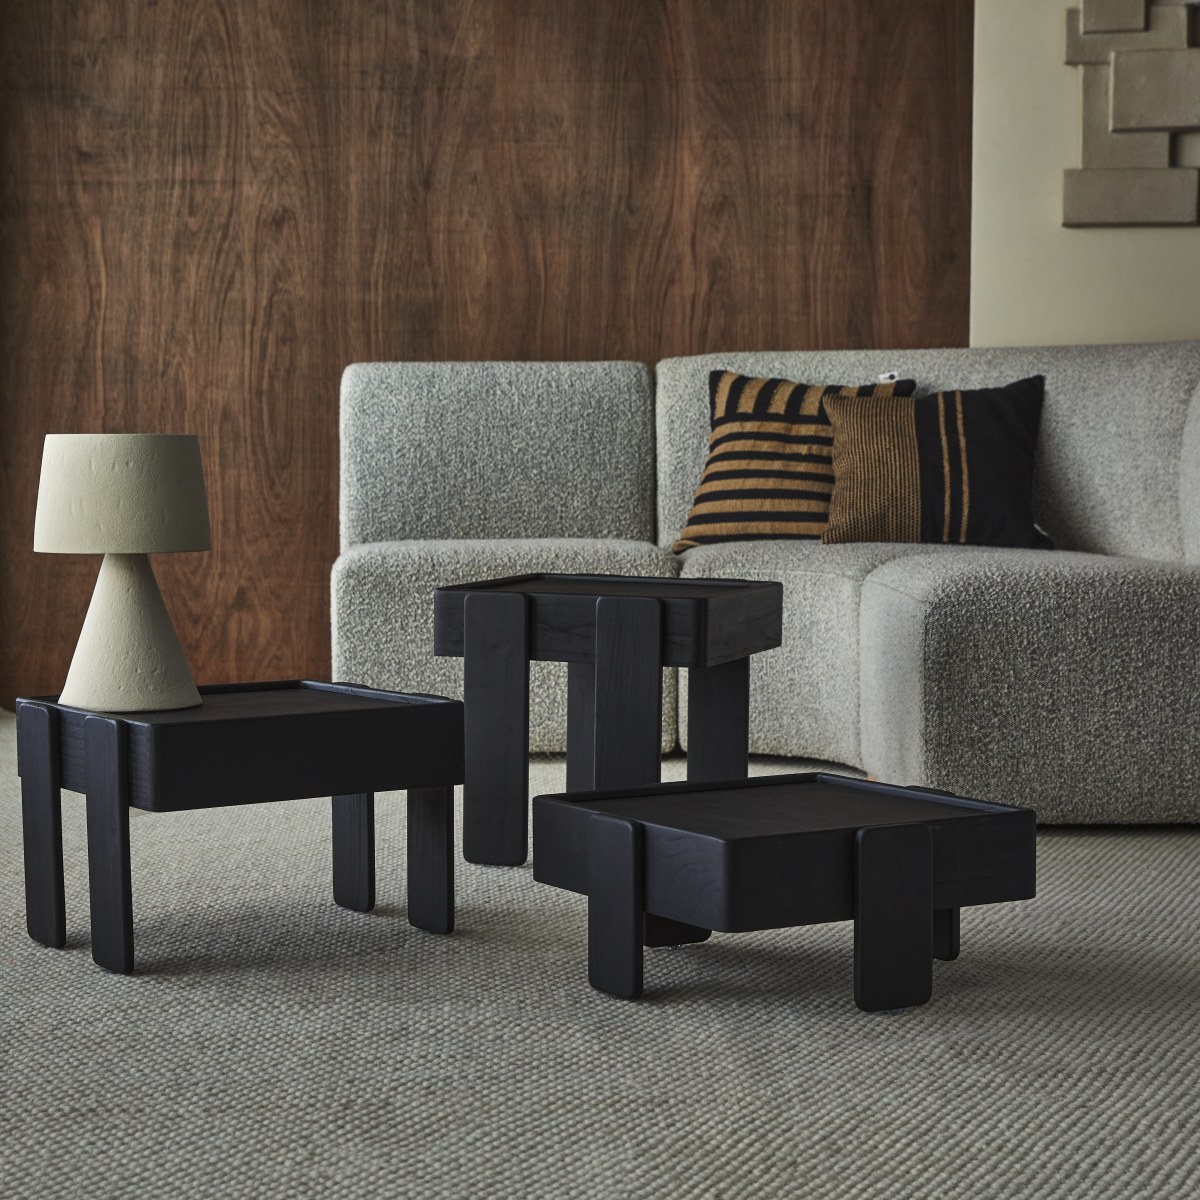 Nido - Wooden nesting tables